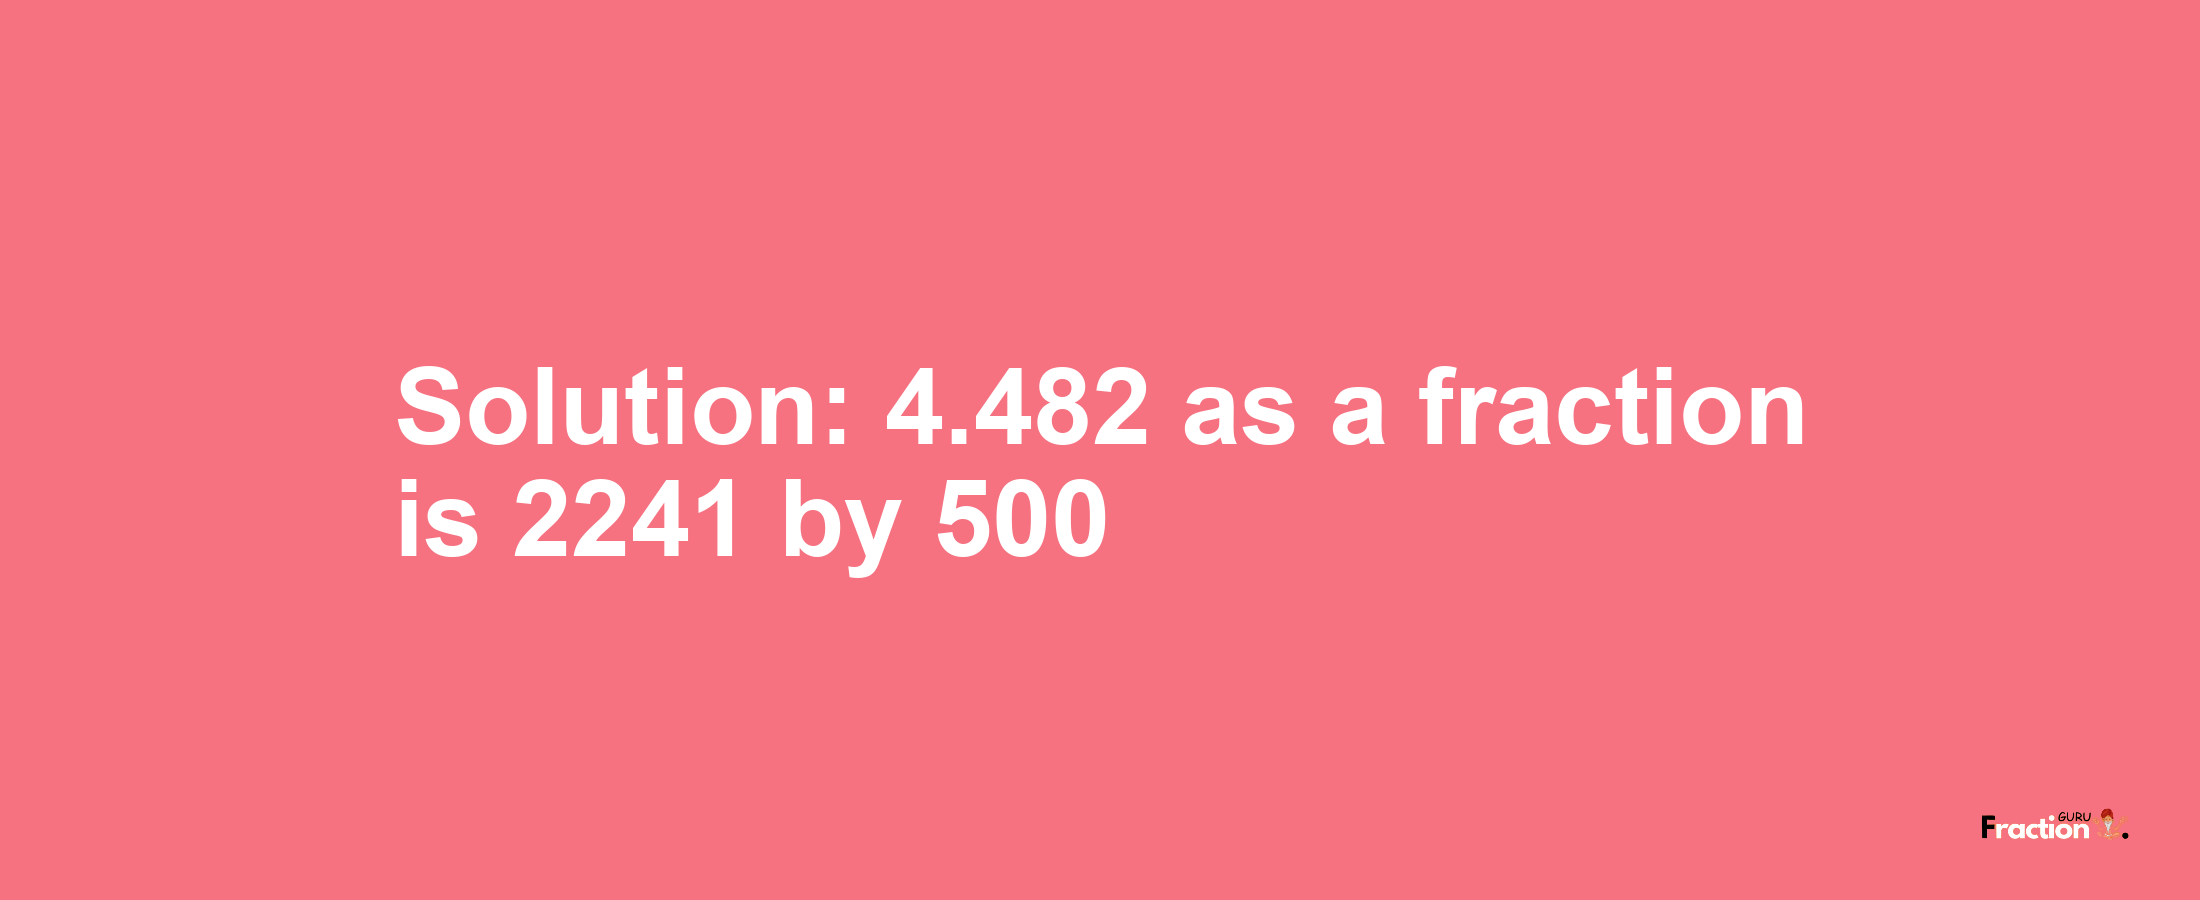 Solution:4.482 as a fraction is 2241/500